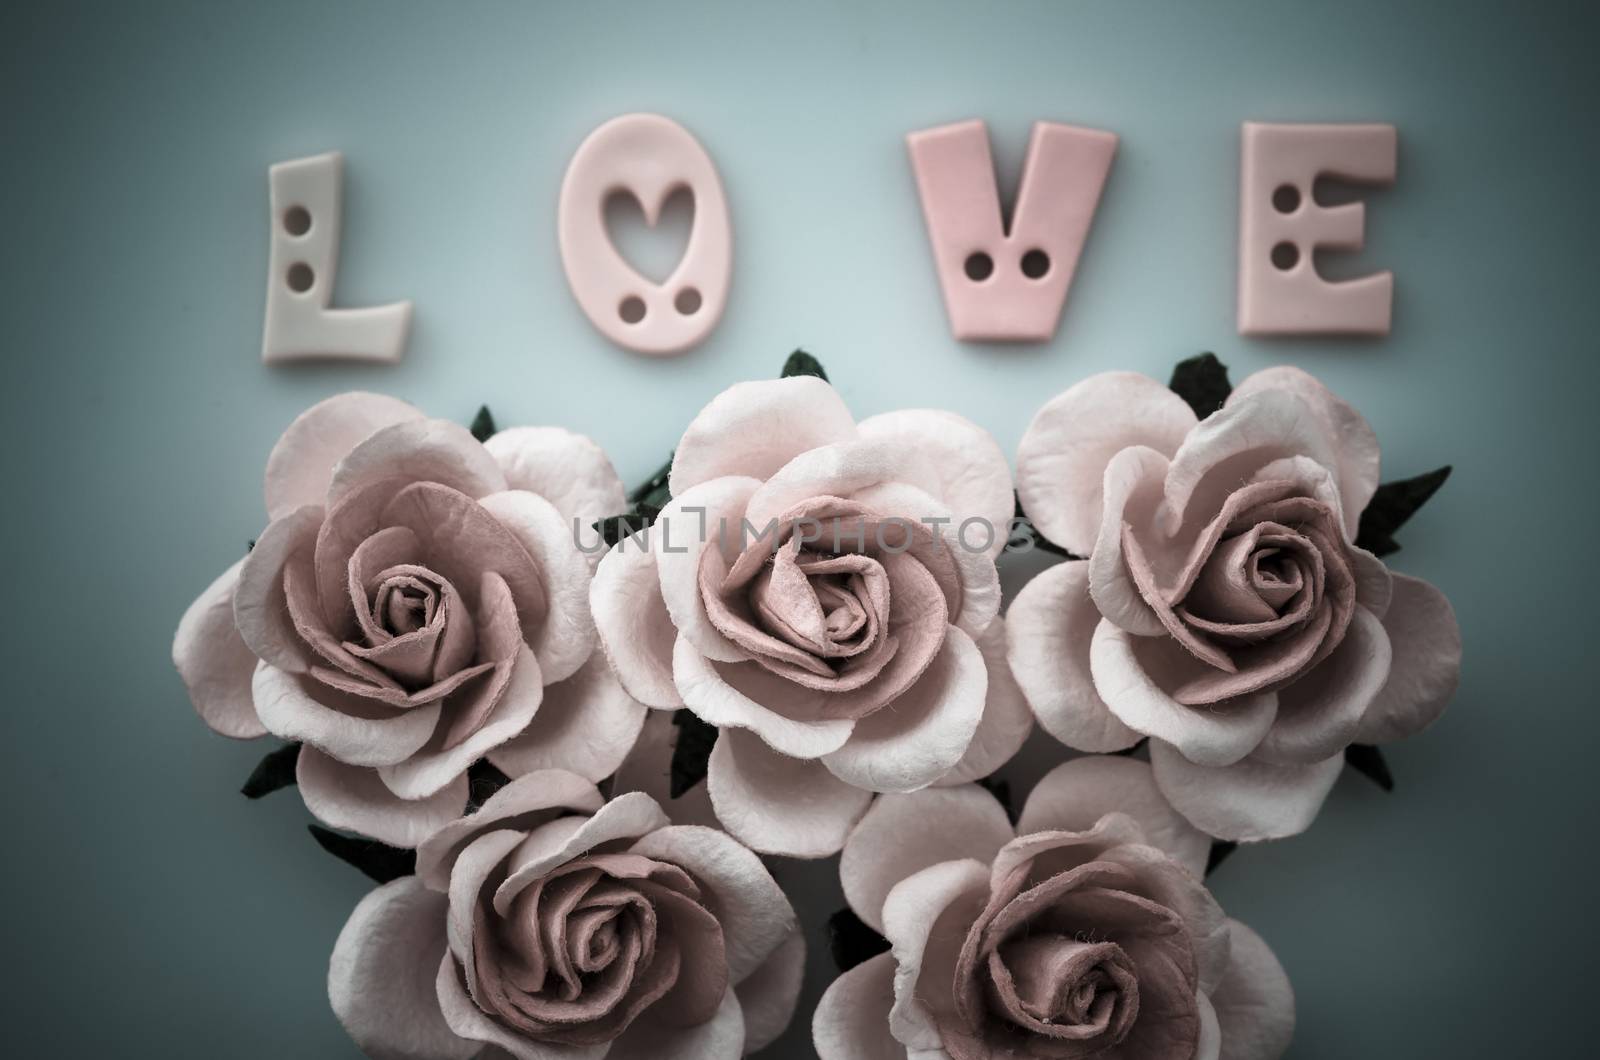 Vintage pink roses flower and love text on blue background.